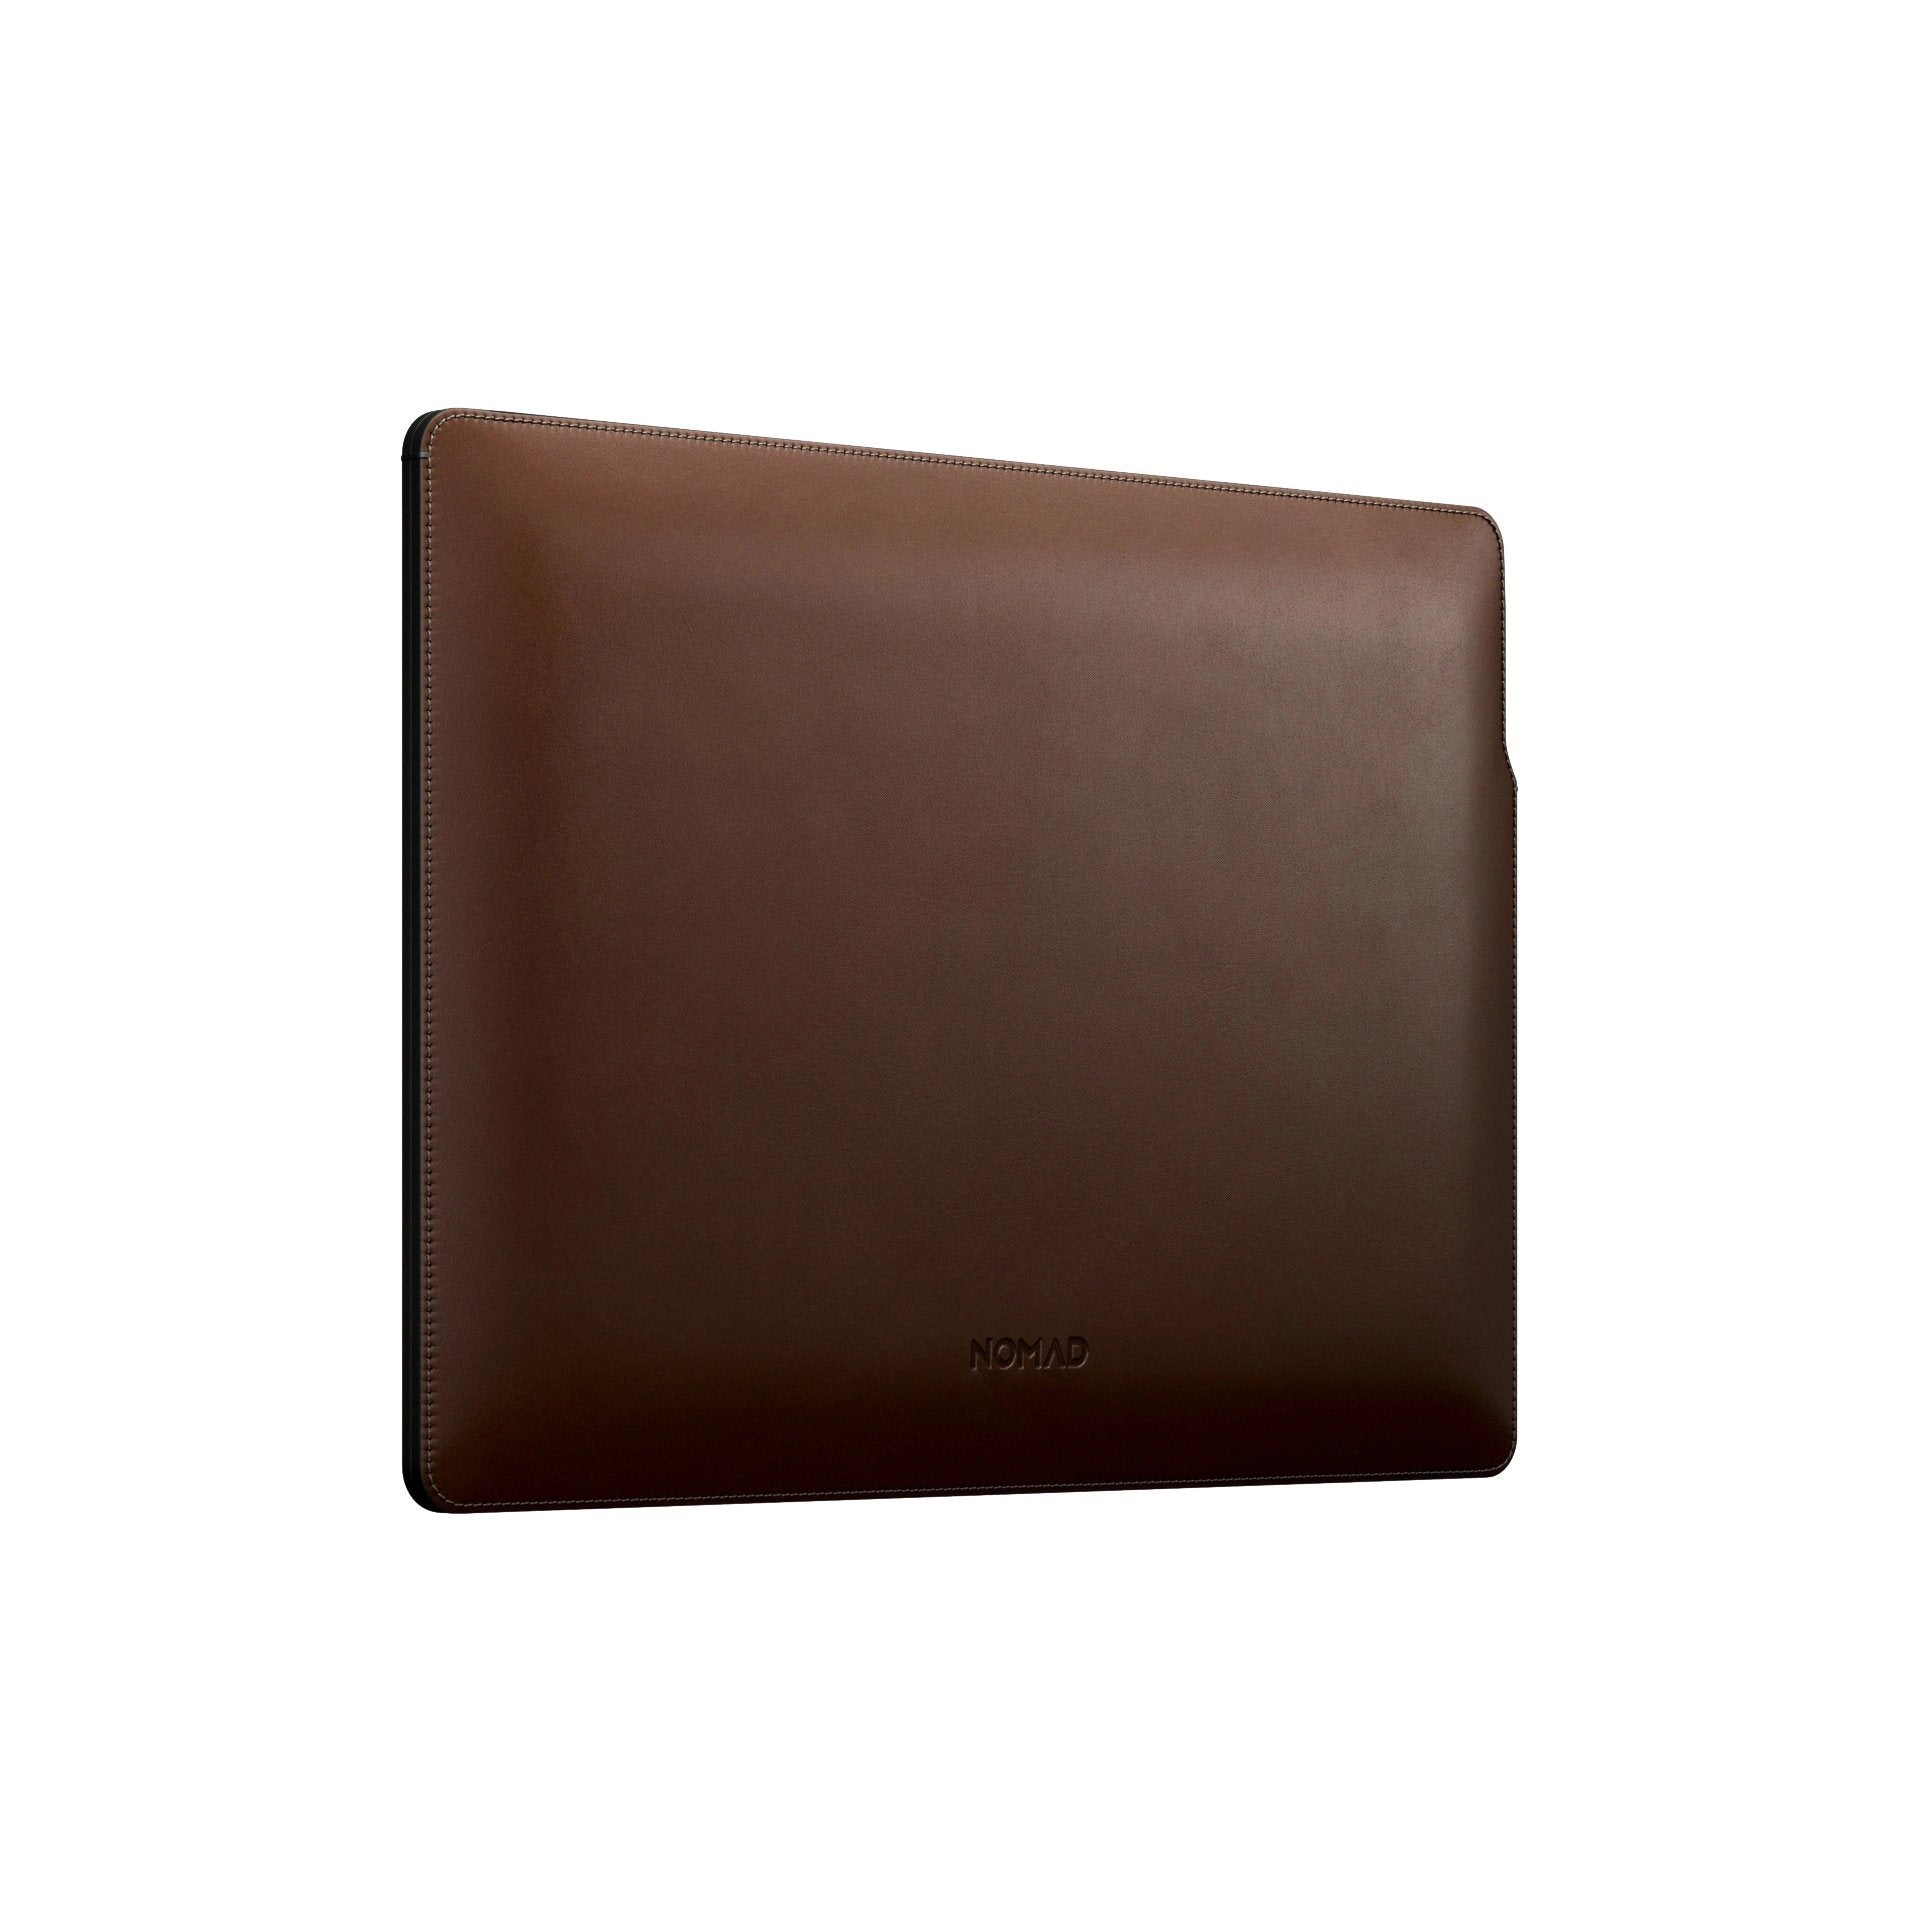 NOMAD Horween Leather Sleeve for MacBook Pro / MacBook Air 13", Rustic Brown Default NOMAD 